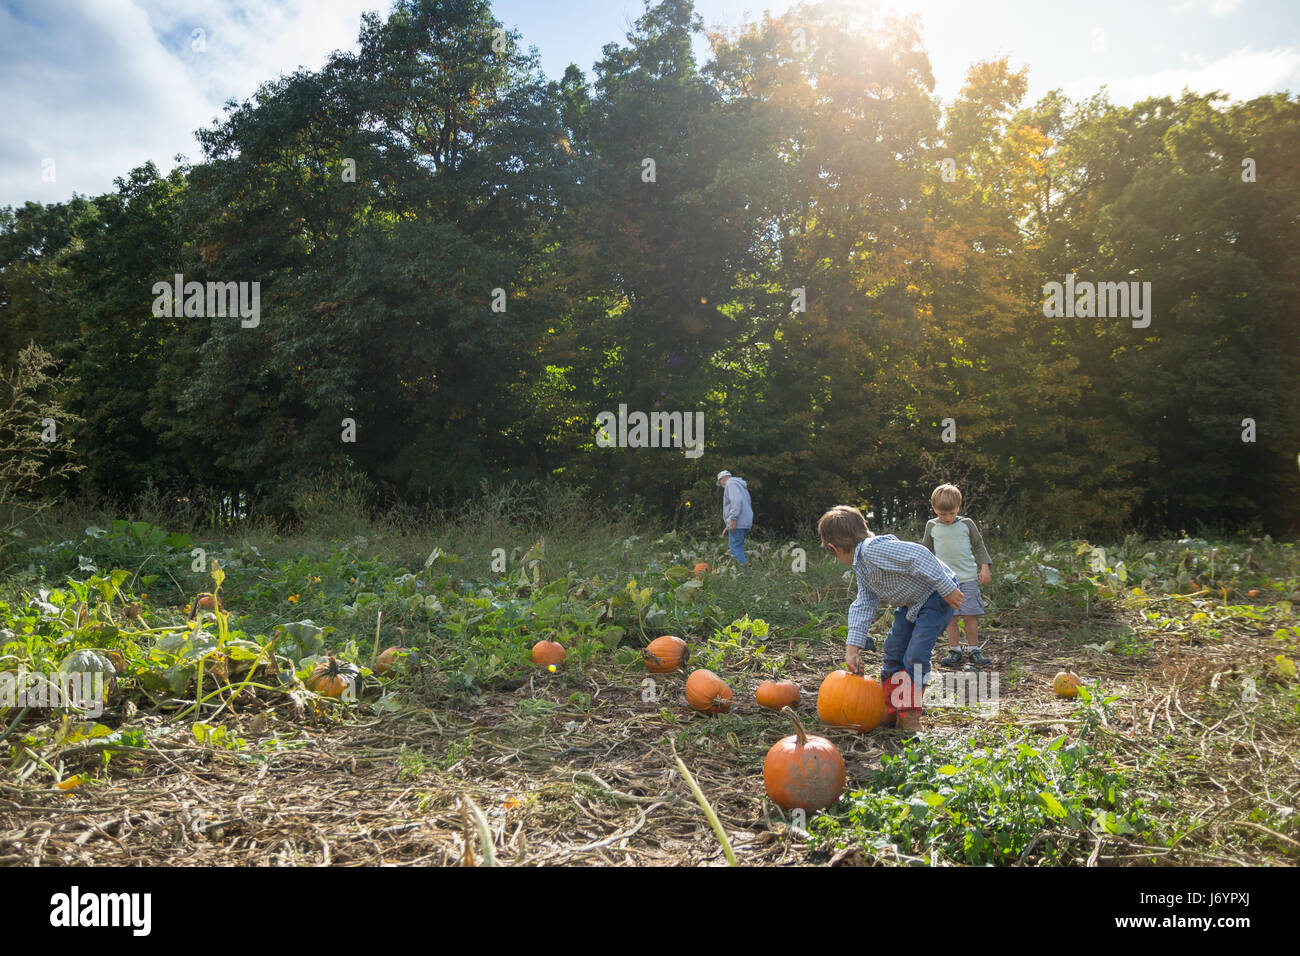 Grandfather picking pumpkins in a pumpkin patch with two grandchildren Stock Photo